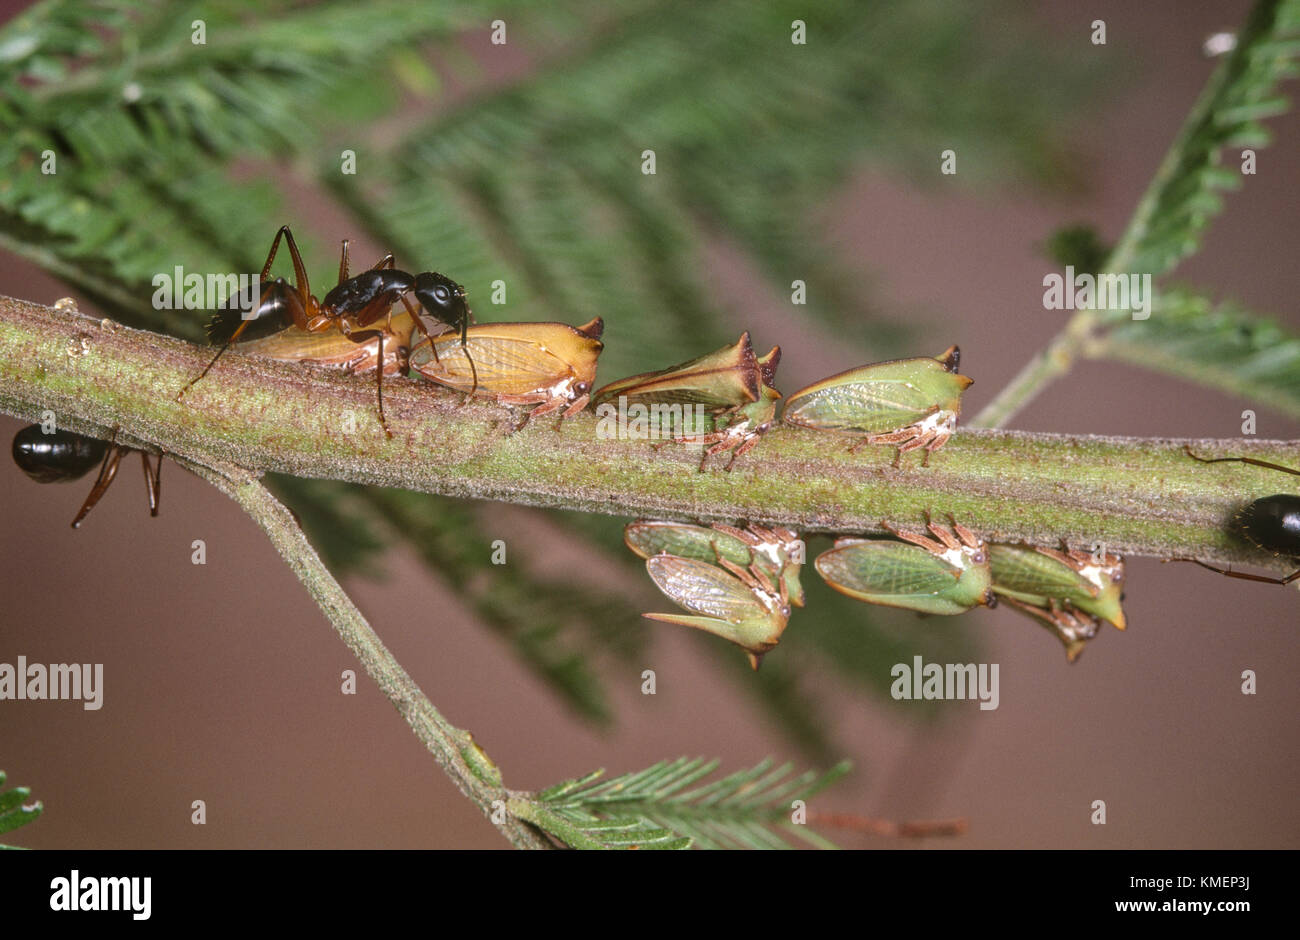 Horned treehoppers (Membracidae) with attendant ants (Camponotus sp.) Stock Photo